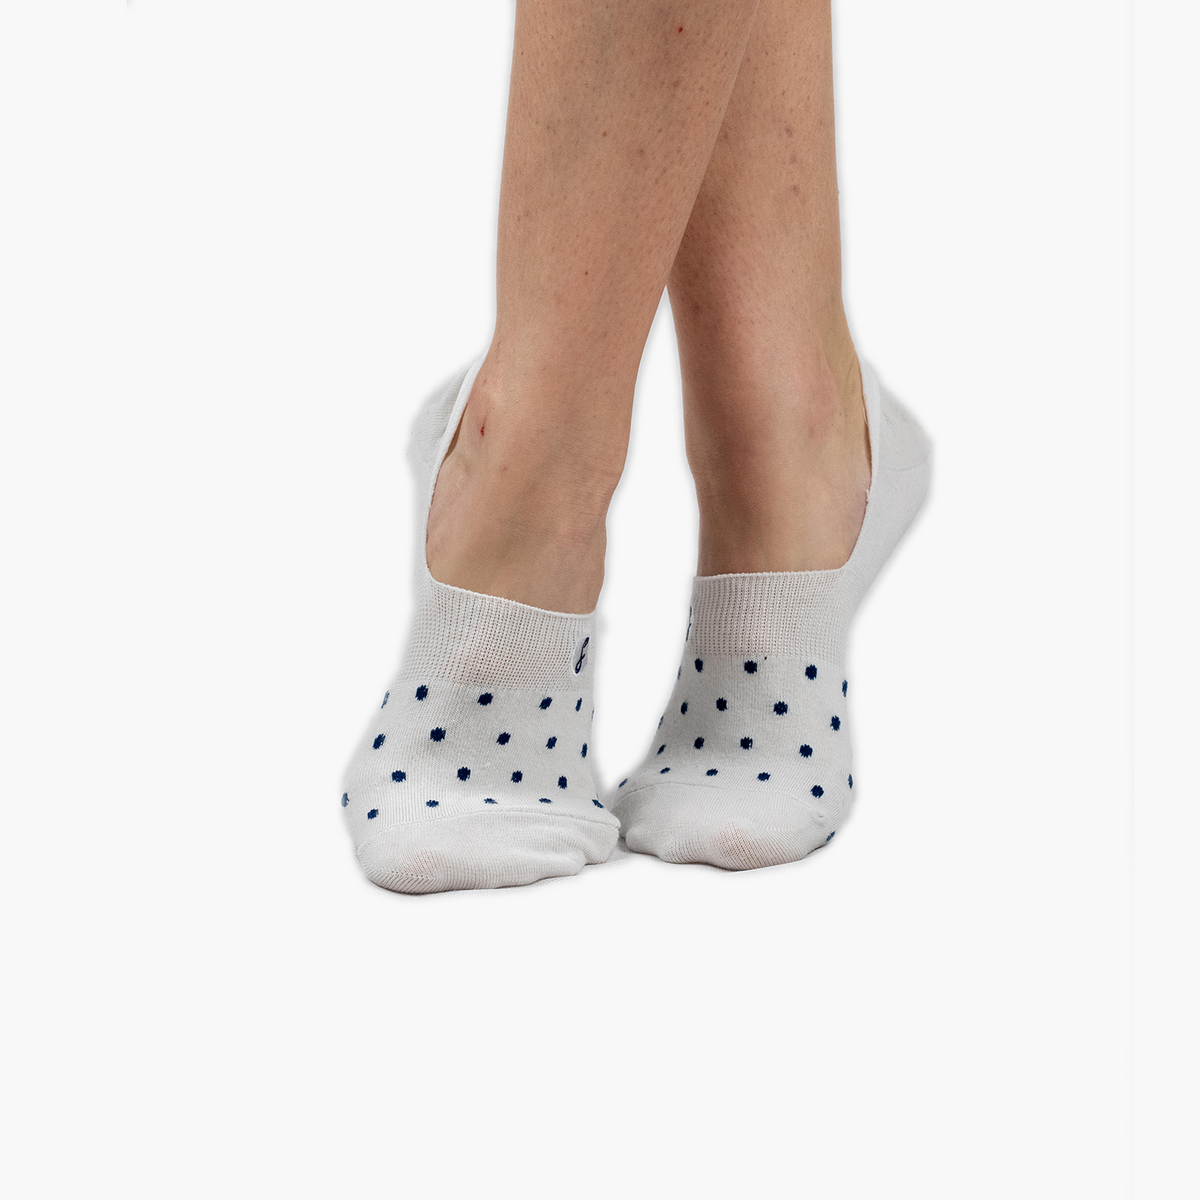 3 Pack off-white and Navy Polka Dot Combed Cotton No-Show Swanky Socks - SwankySocks